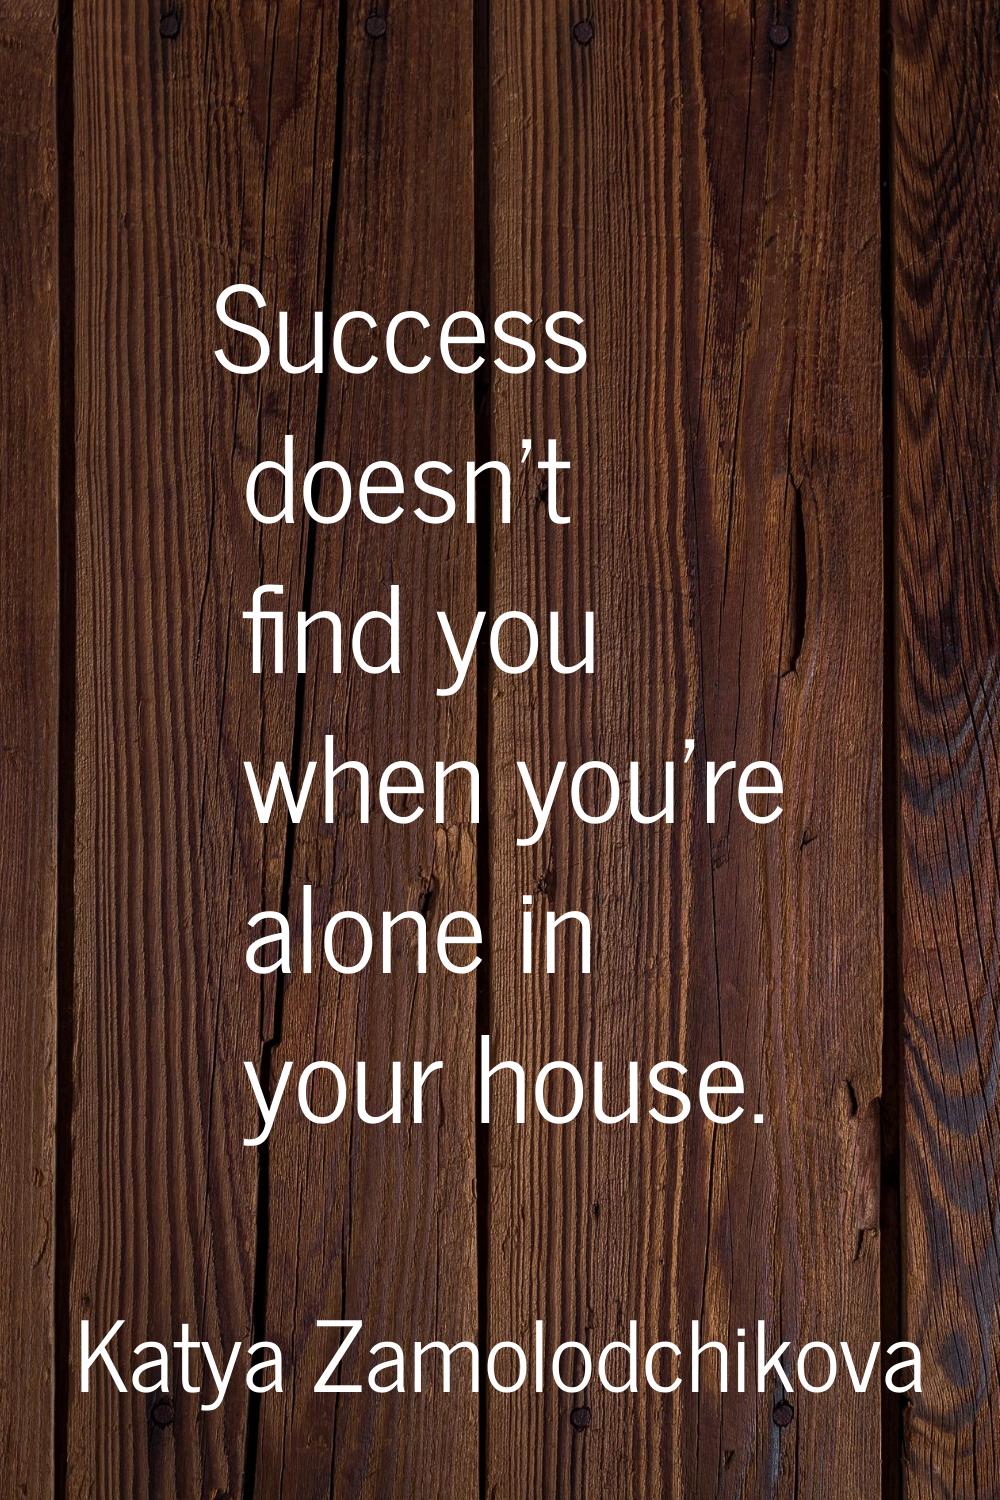 Success doesn't find you when you're alone in your house.